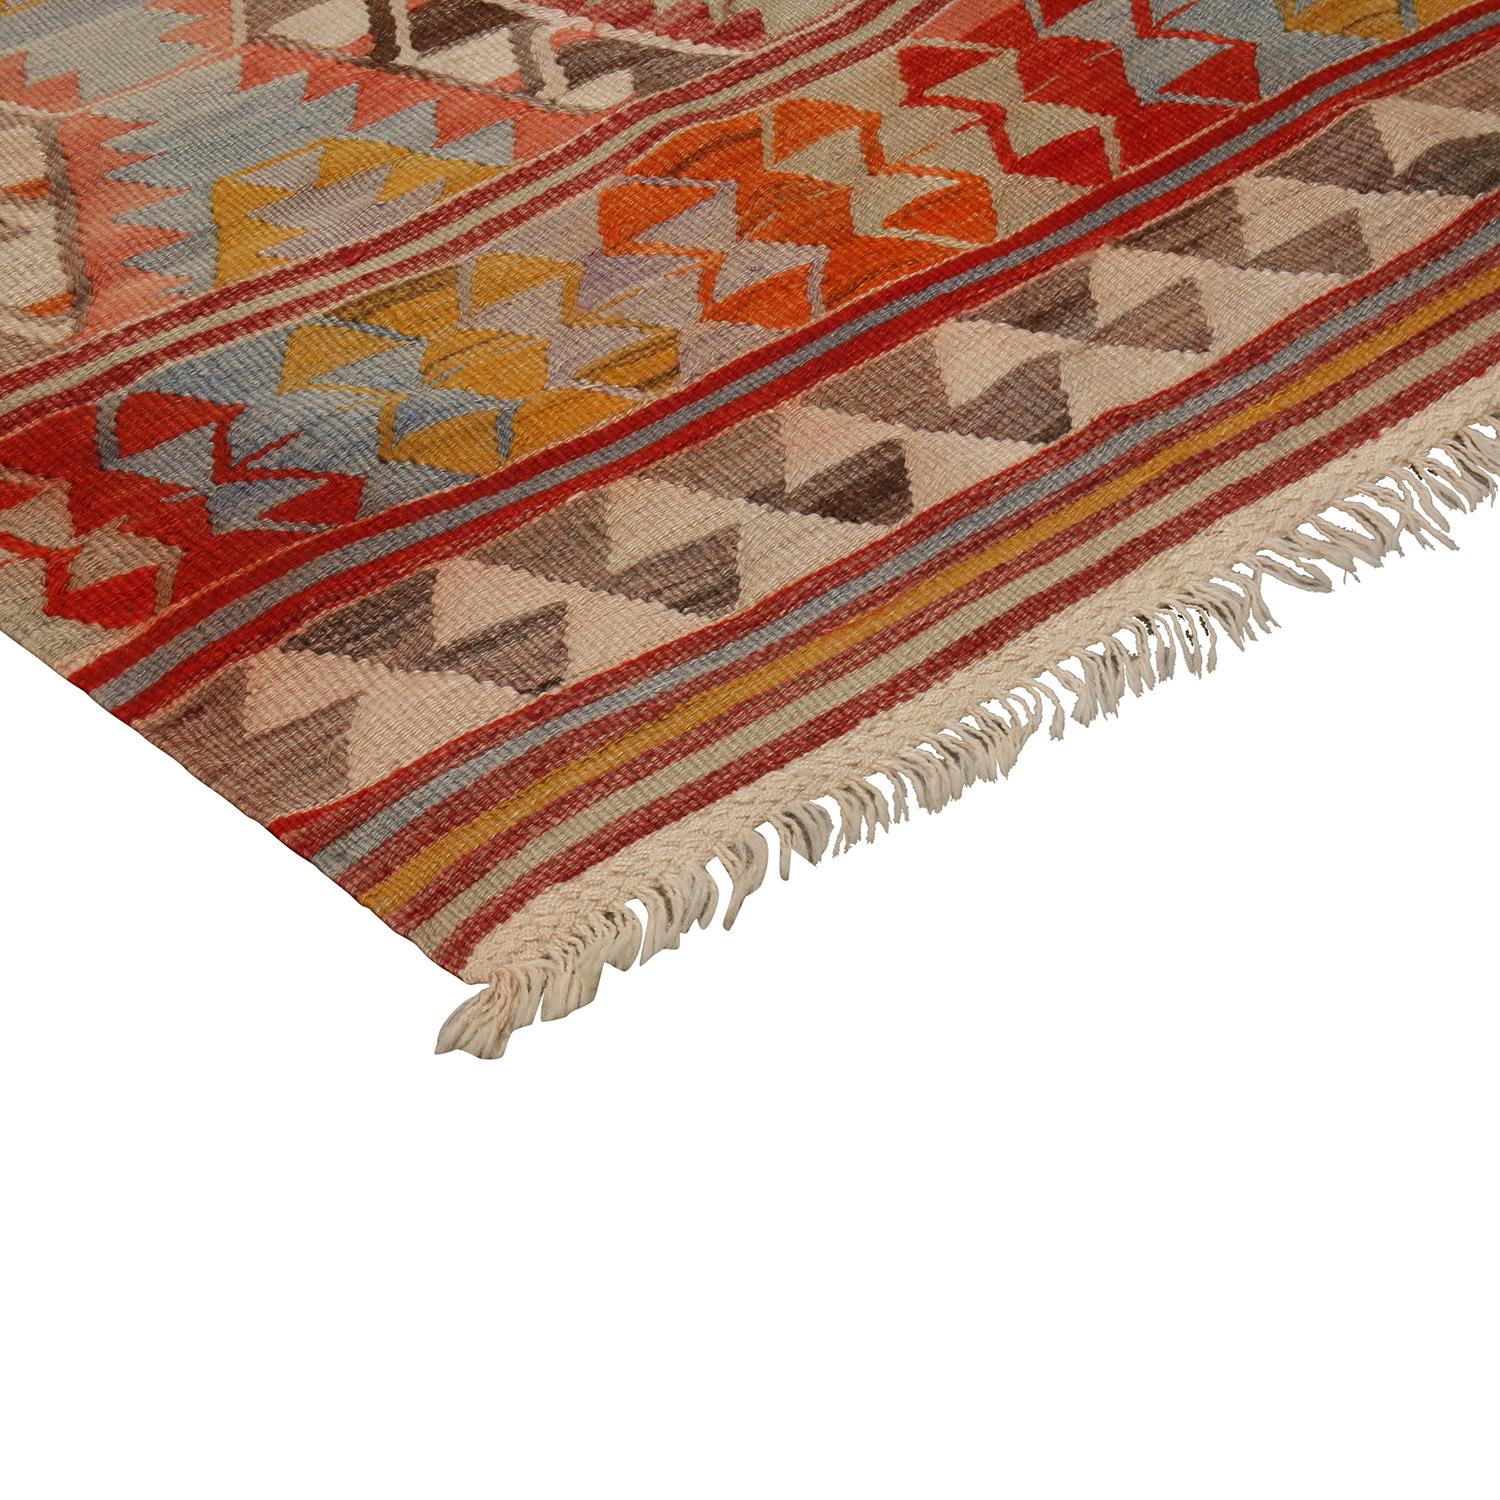 Flat-woven in high-quality wool originating from Turkey between 1930-1940, this vintage Fathiye Kilim rug hosts an intriguing pallet of vibrant rich and pastel colorways complementing a very Moroccan sense of joyful, tribal geometry, enjoying the